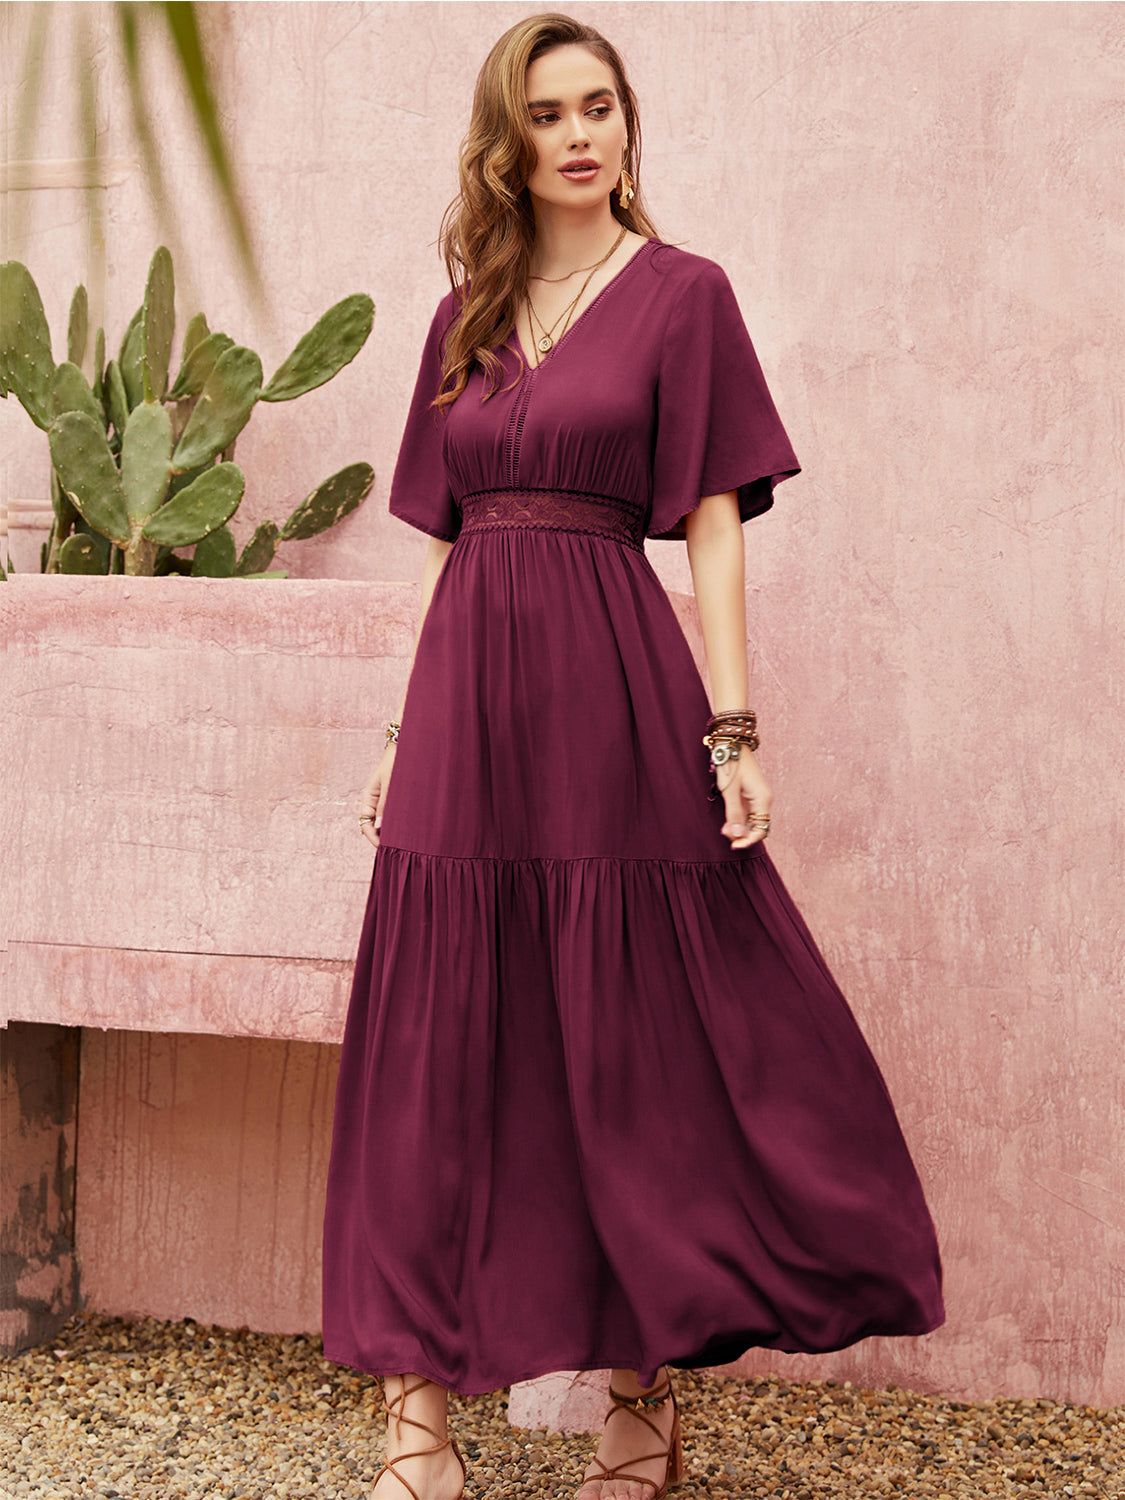 Whispering Vines Ruched Dress